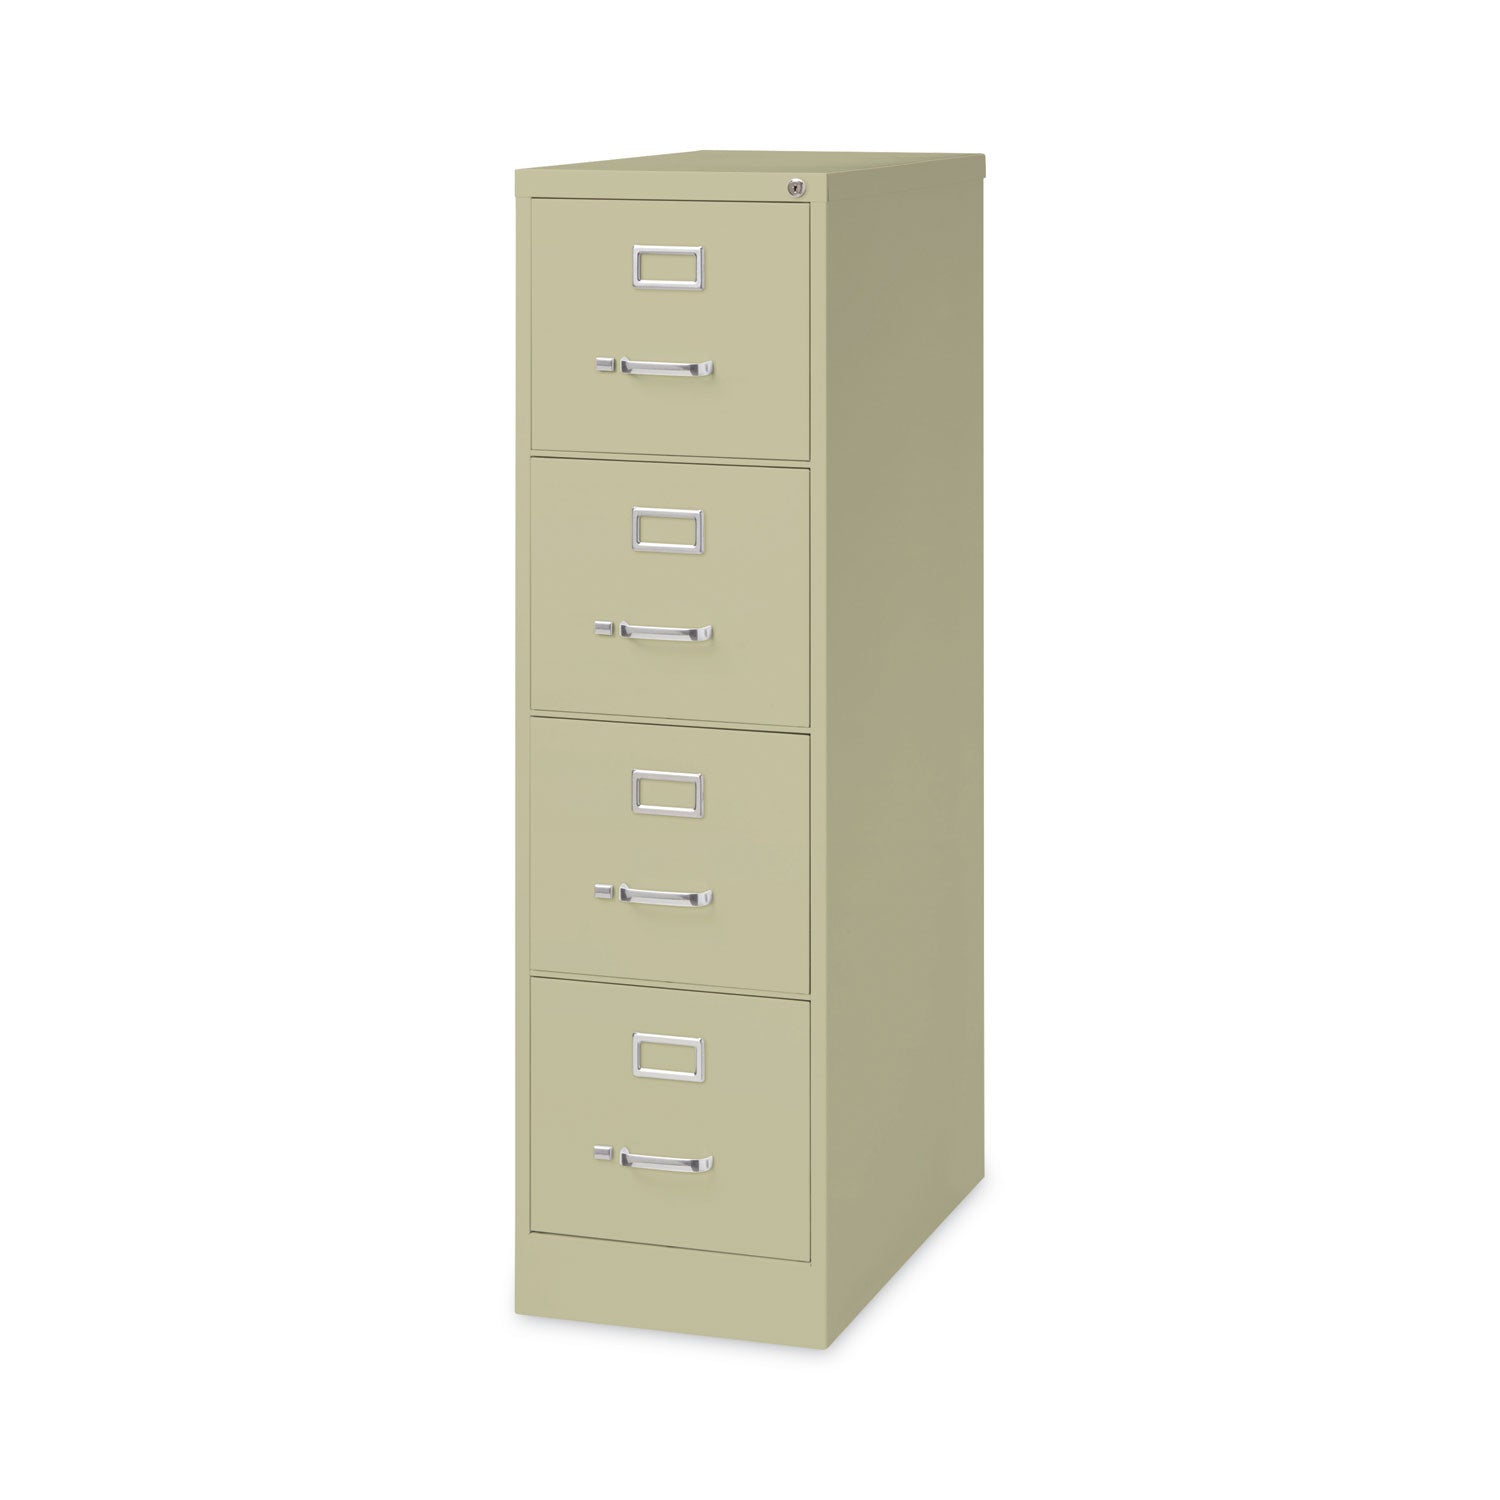 vertical-letter-file-cabinet-4-letter-size-file-drawers-putty-15-x-265-x-52_hid14028 - 6